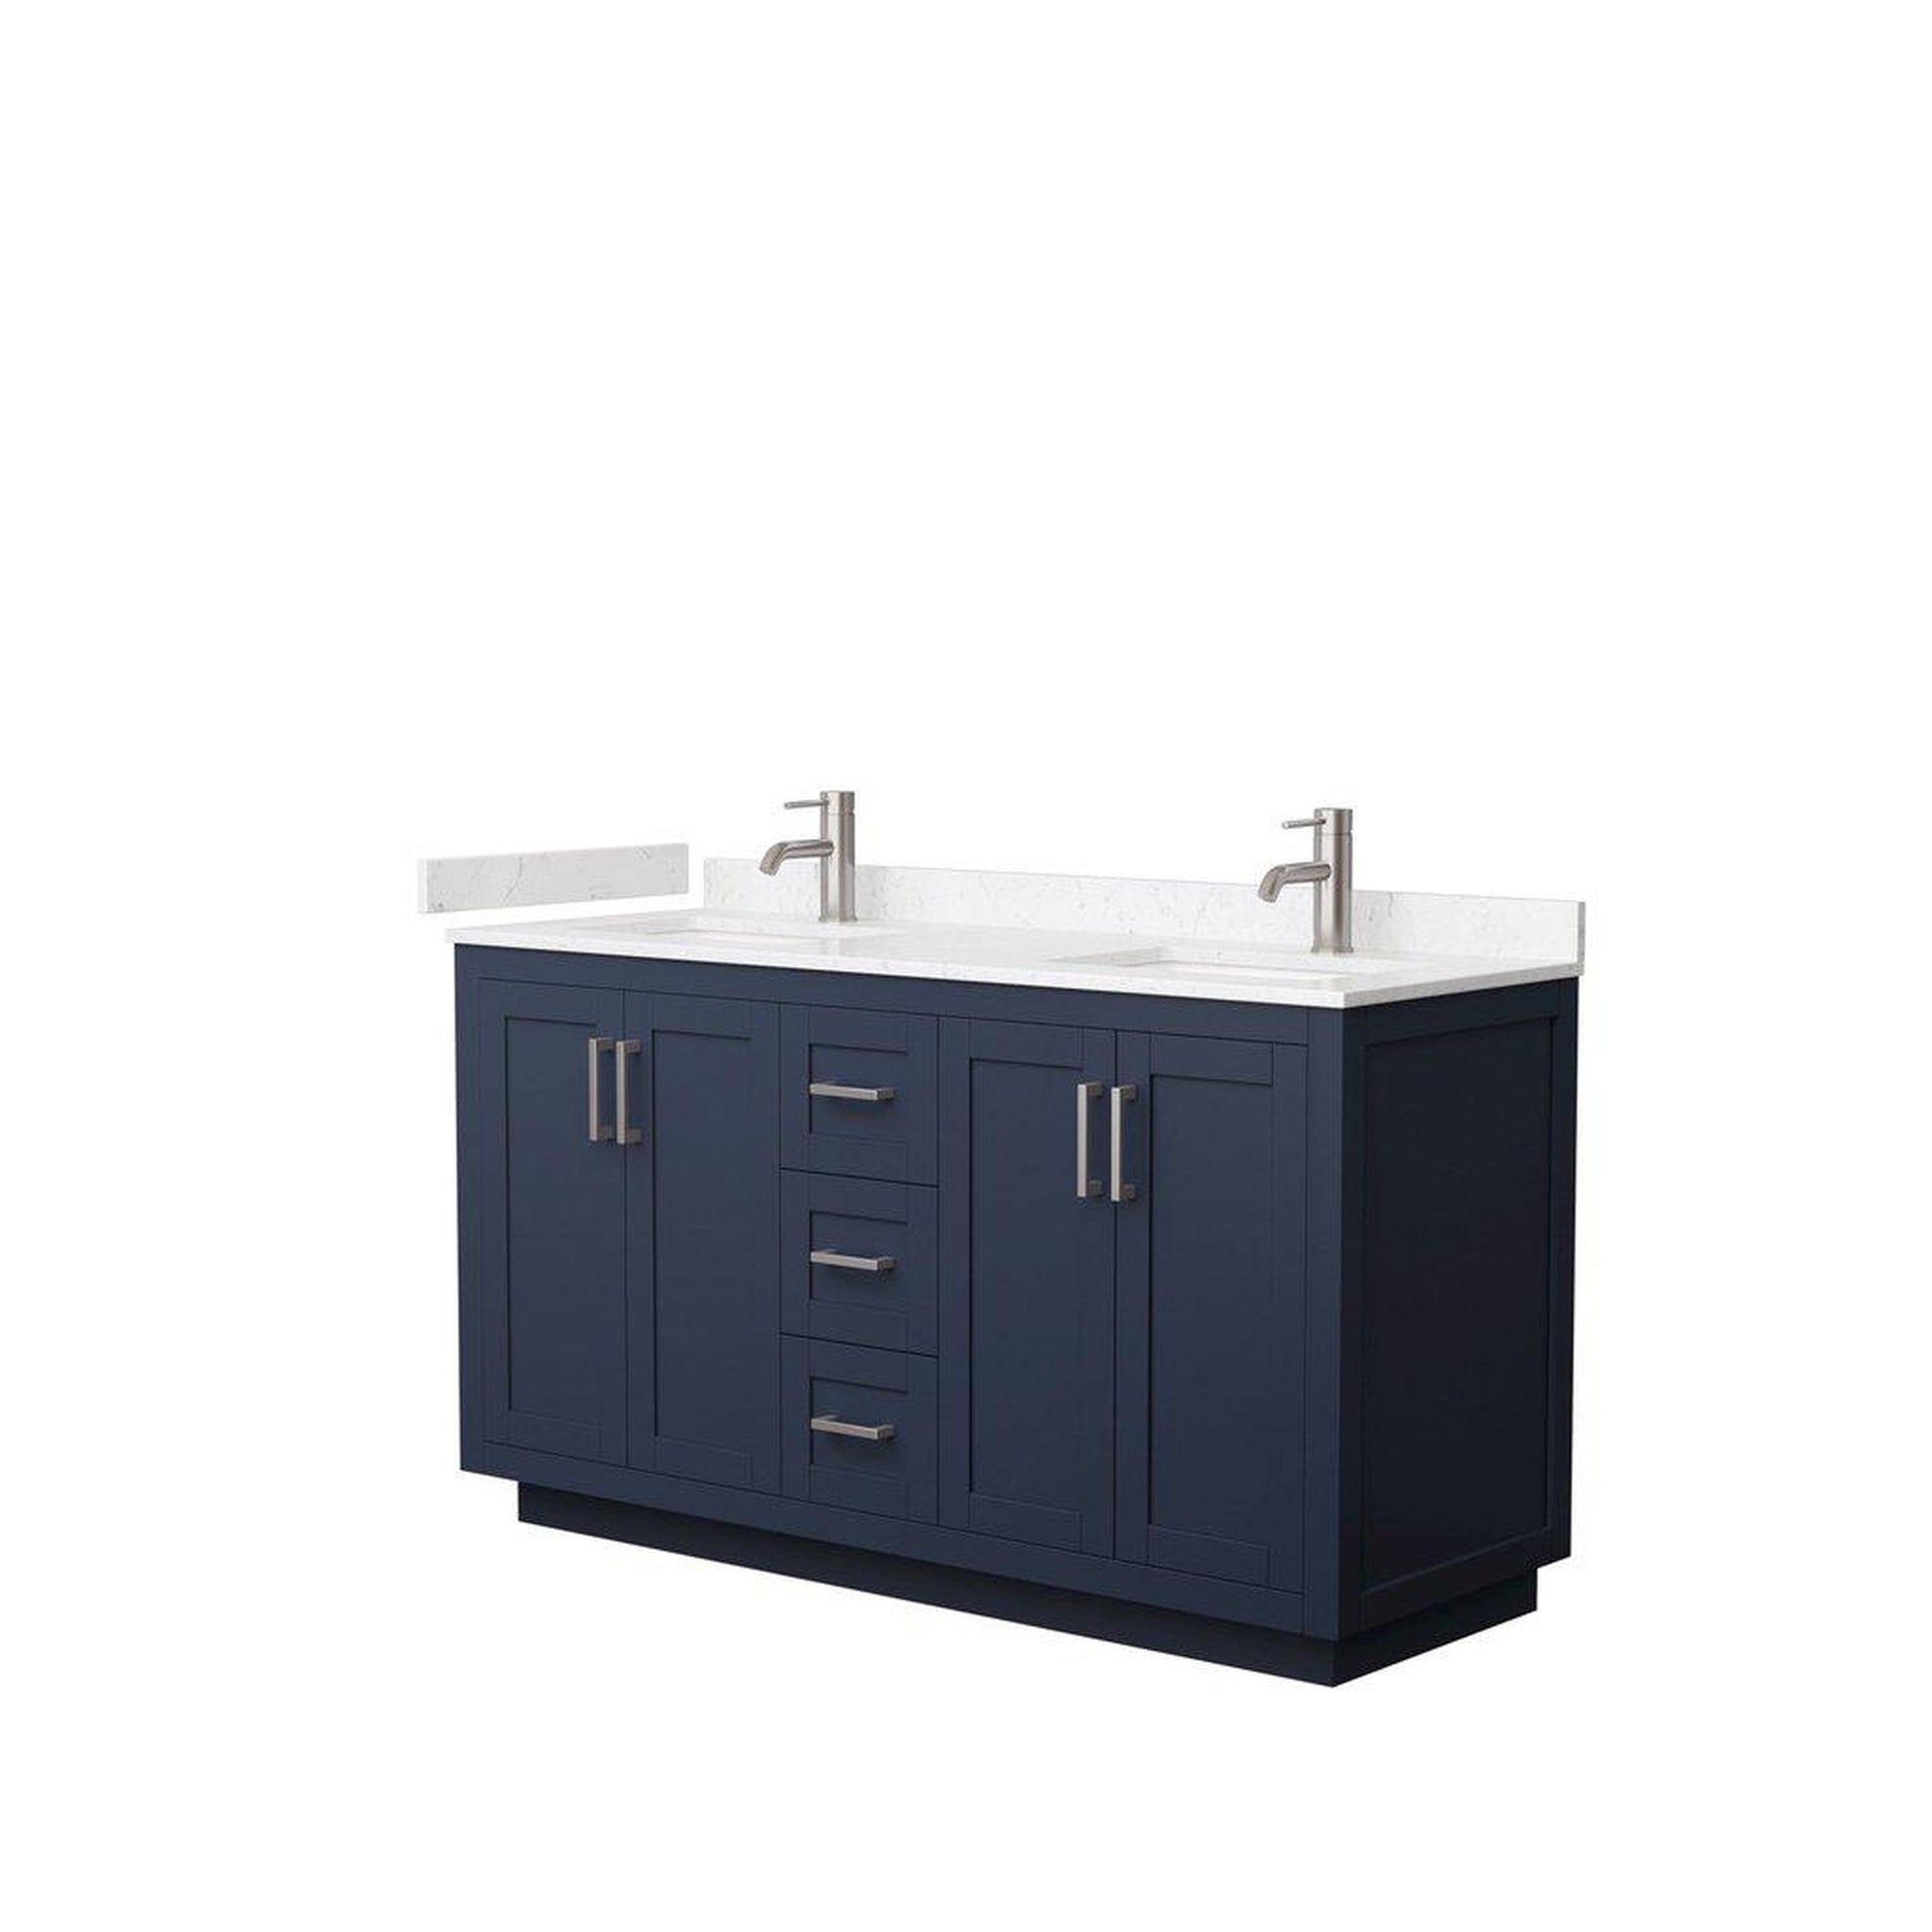 Wyndham Collection Miranda 60" Double Bathroom Dark Blue Vanity Set With Light-Vein Carrara Cultured Marble Countertop, Undermount Square Sink, And Brushed Nickel Trim